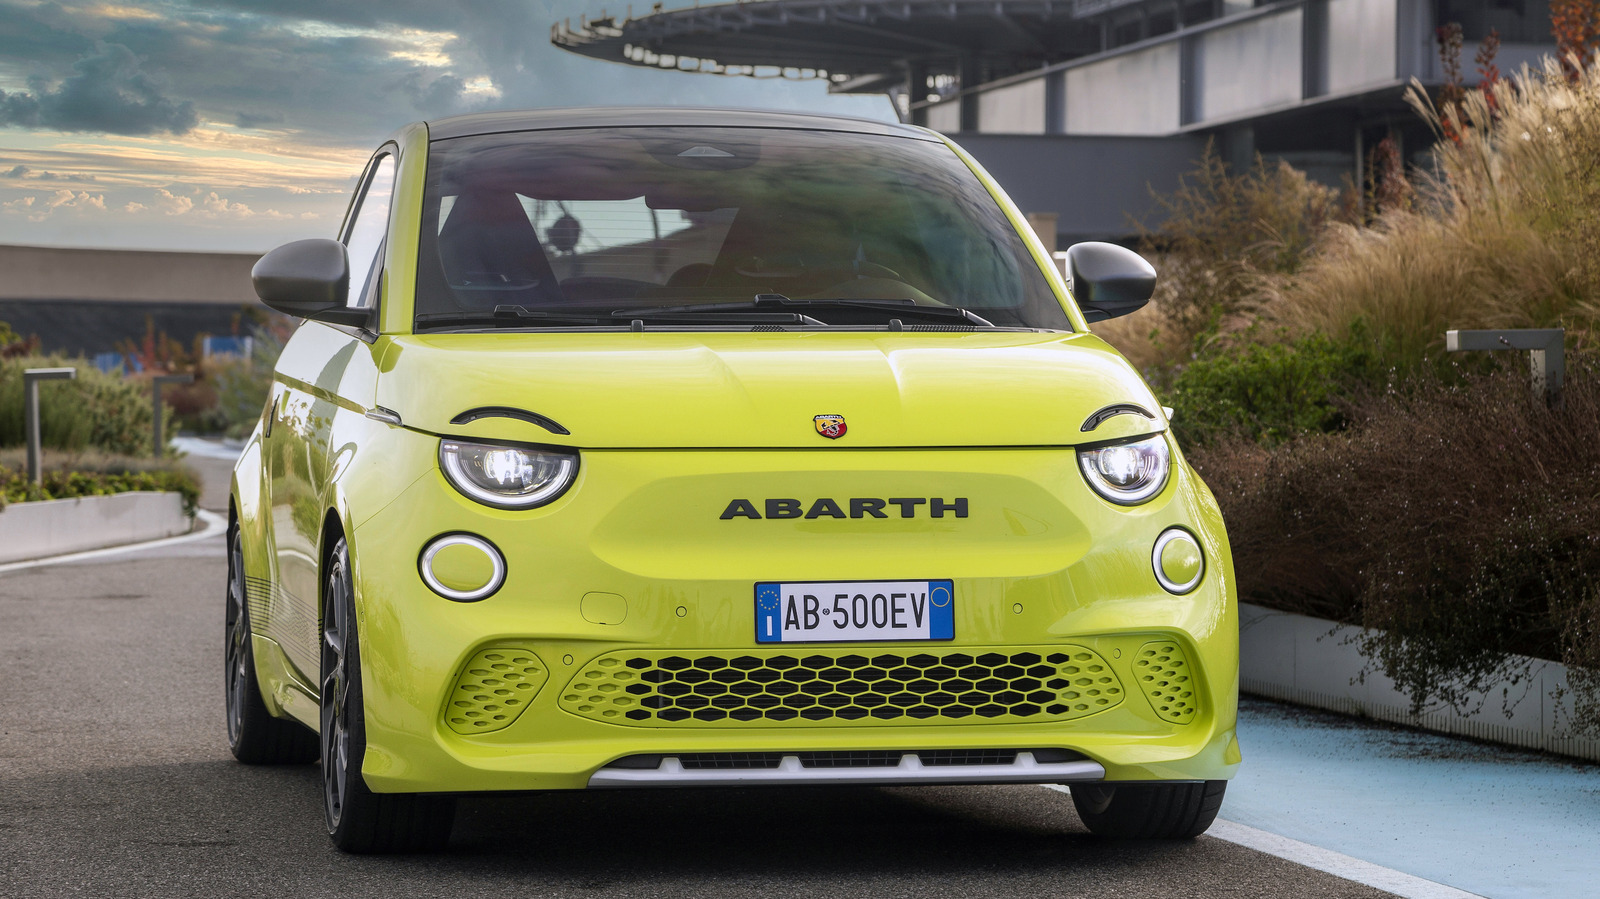 New Abarth 500e Is The Electric Hot Hatch We’ve Been Waiting For – SlashGear